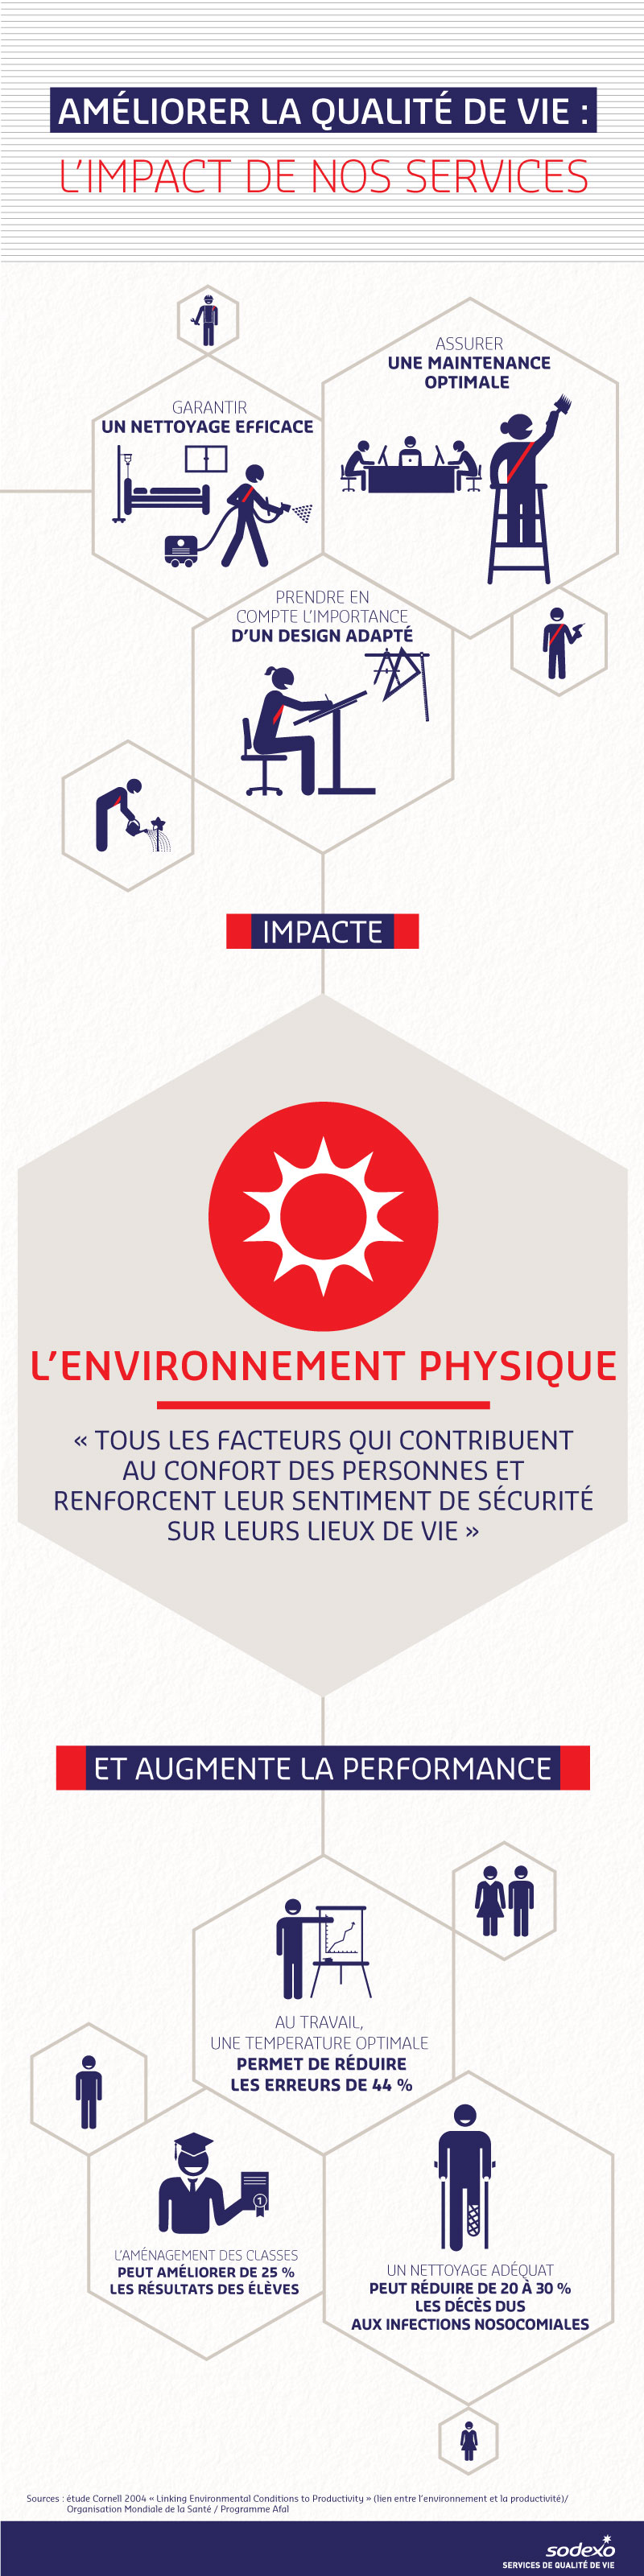 Quality of Life Dimension - Physical Environnement (infographic)